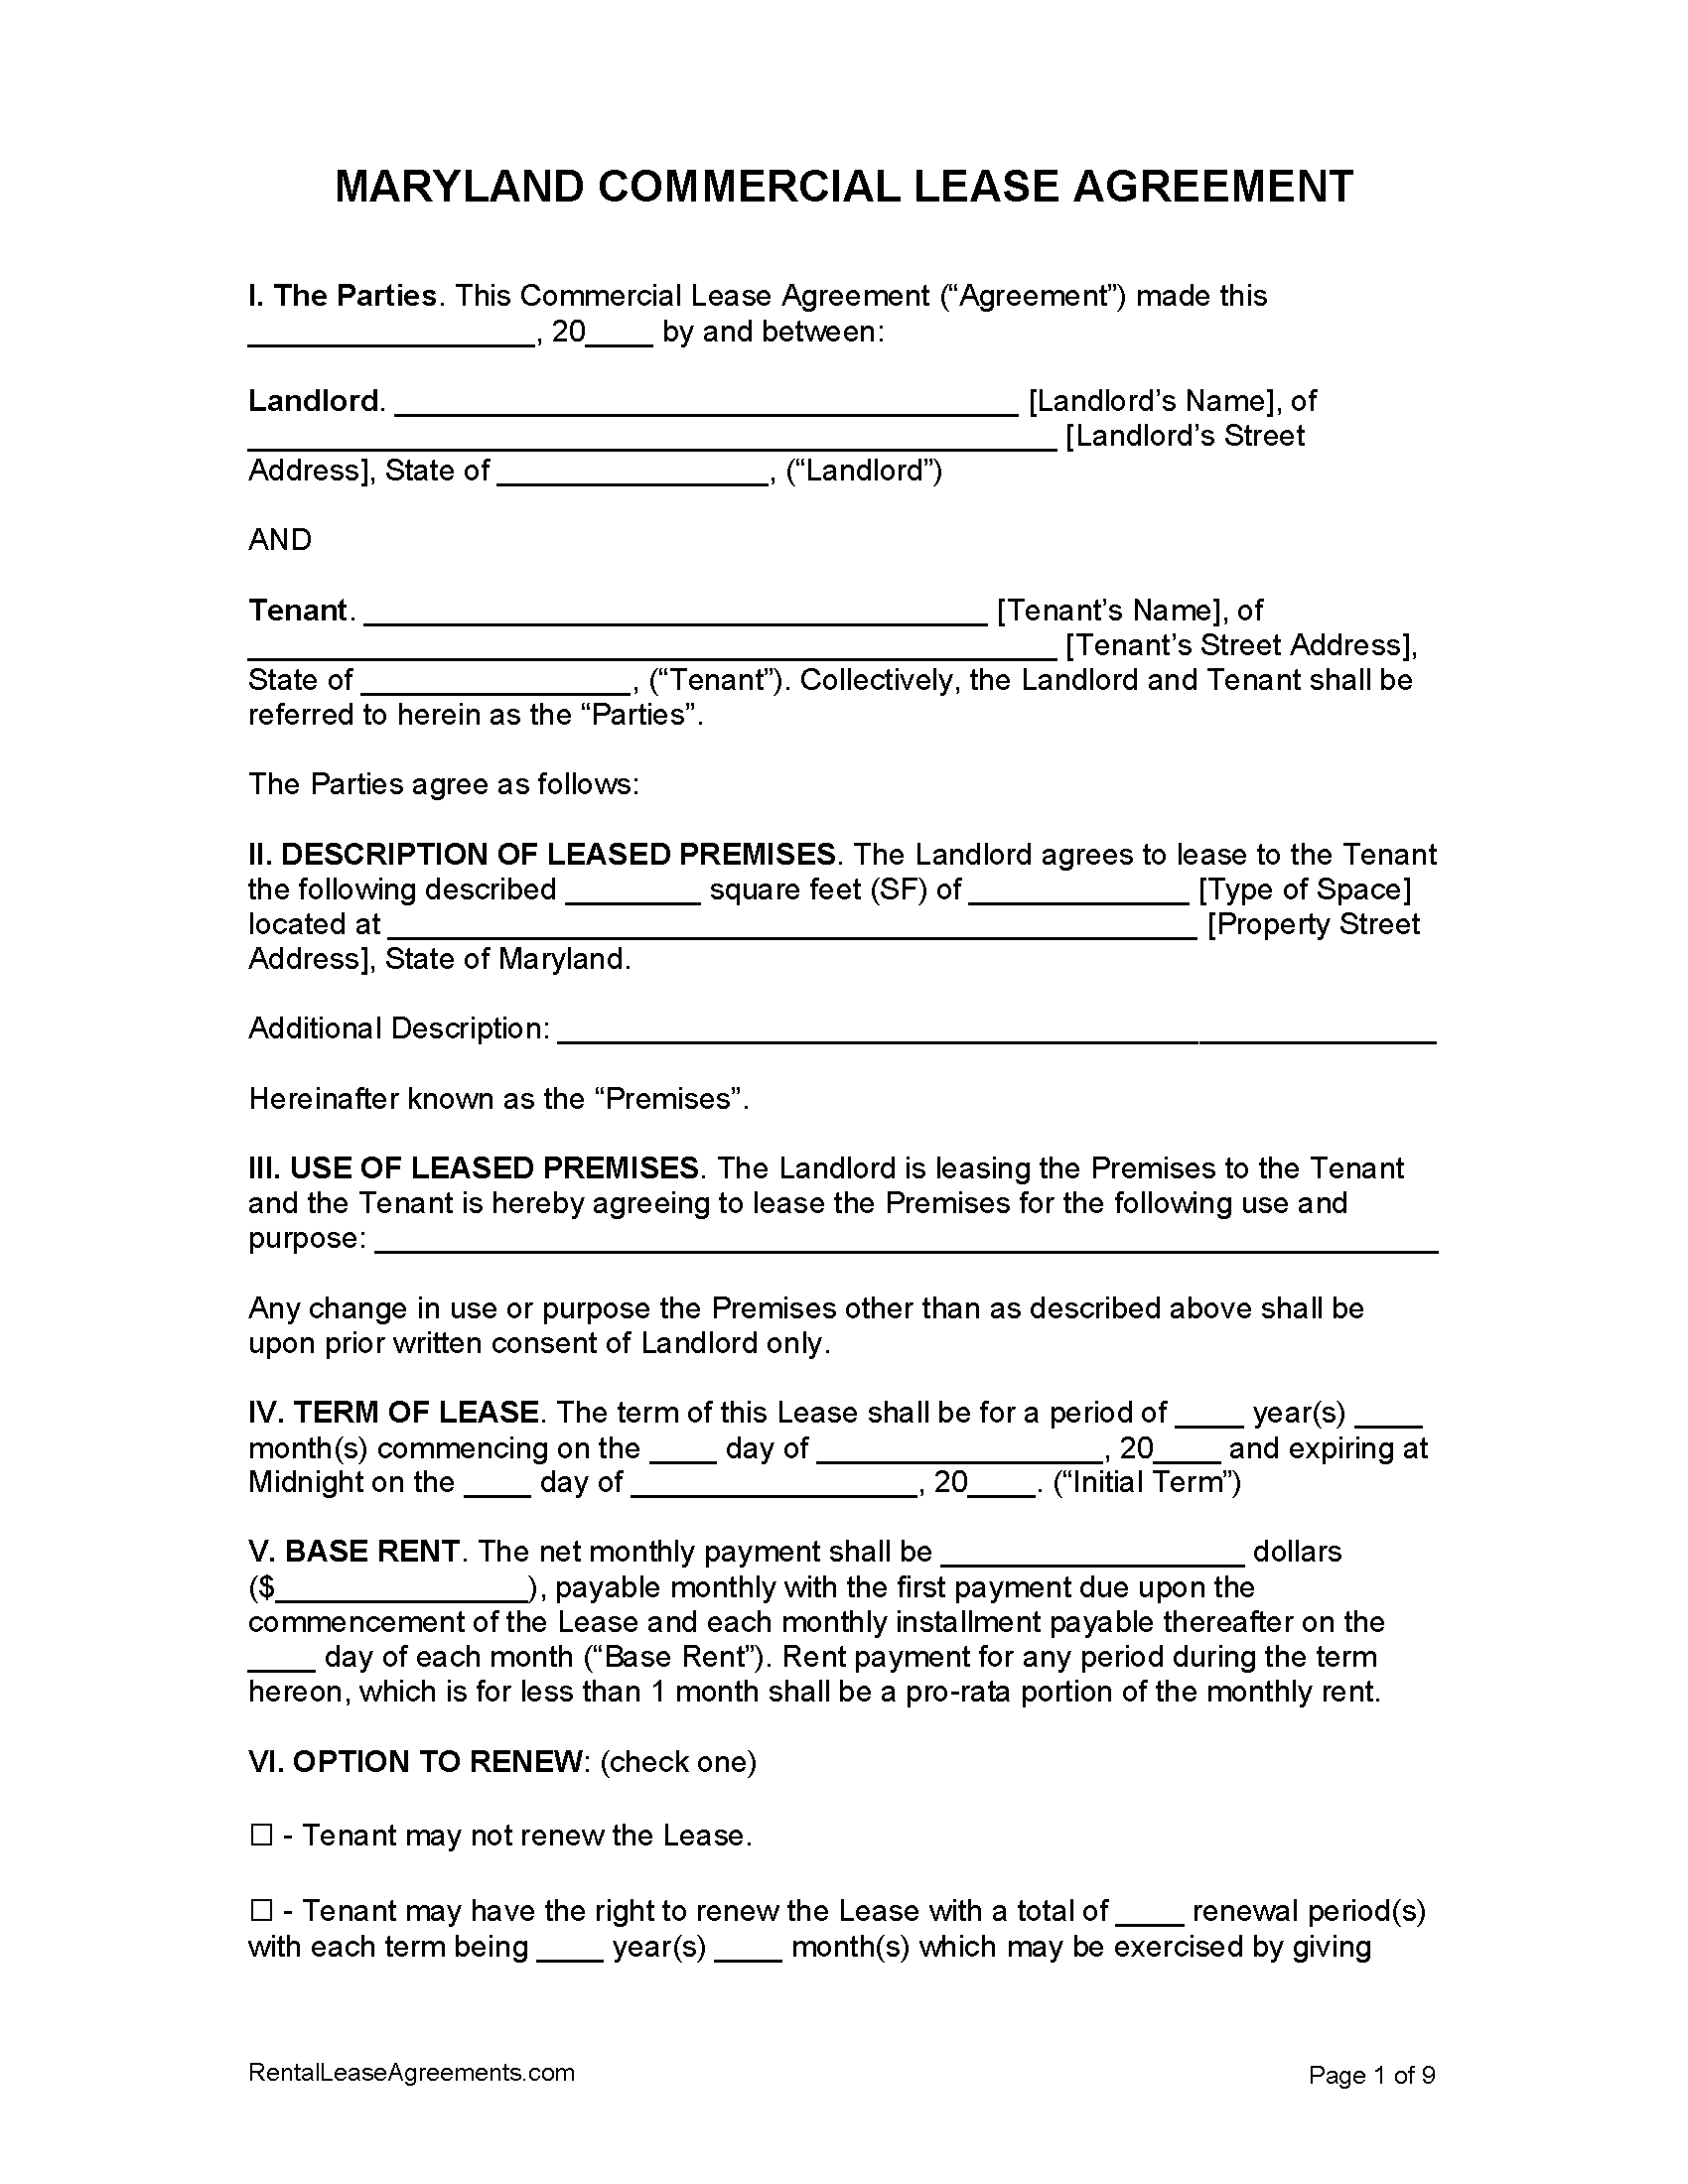 free maryland commercial lease agreement form pdf template